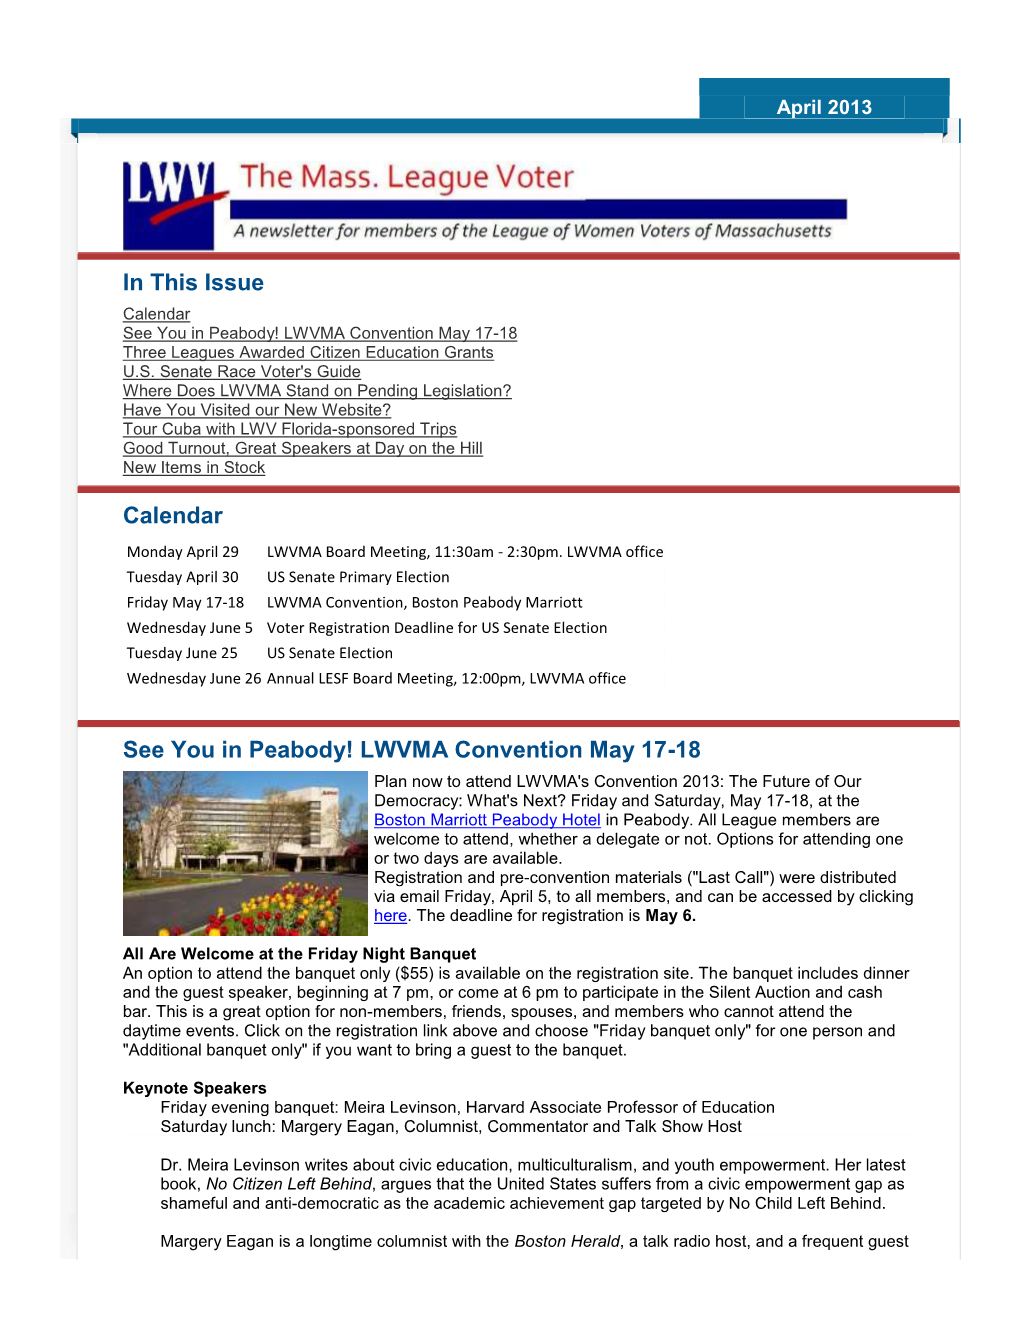 LWVMA Convention May 17-18 Three Leagues Awarded Citizen Education Grants U.S